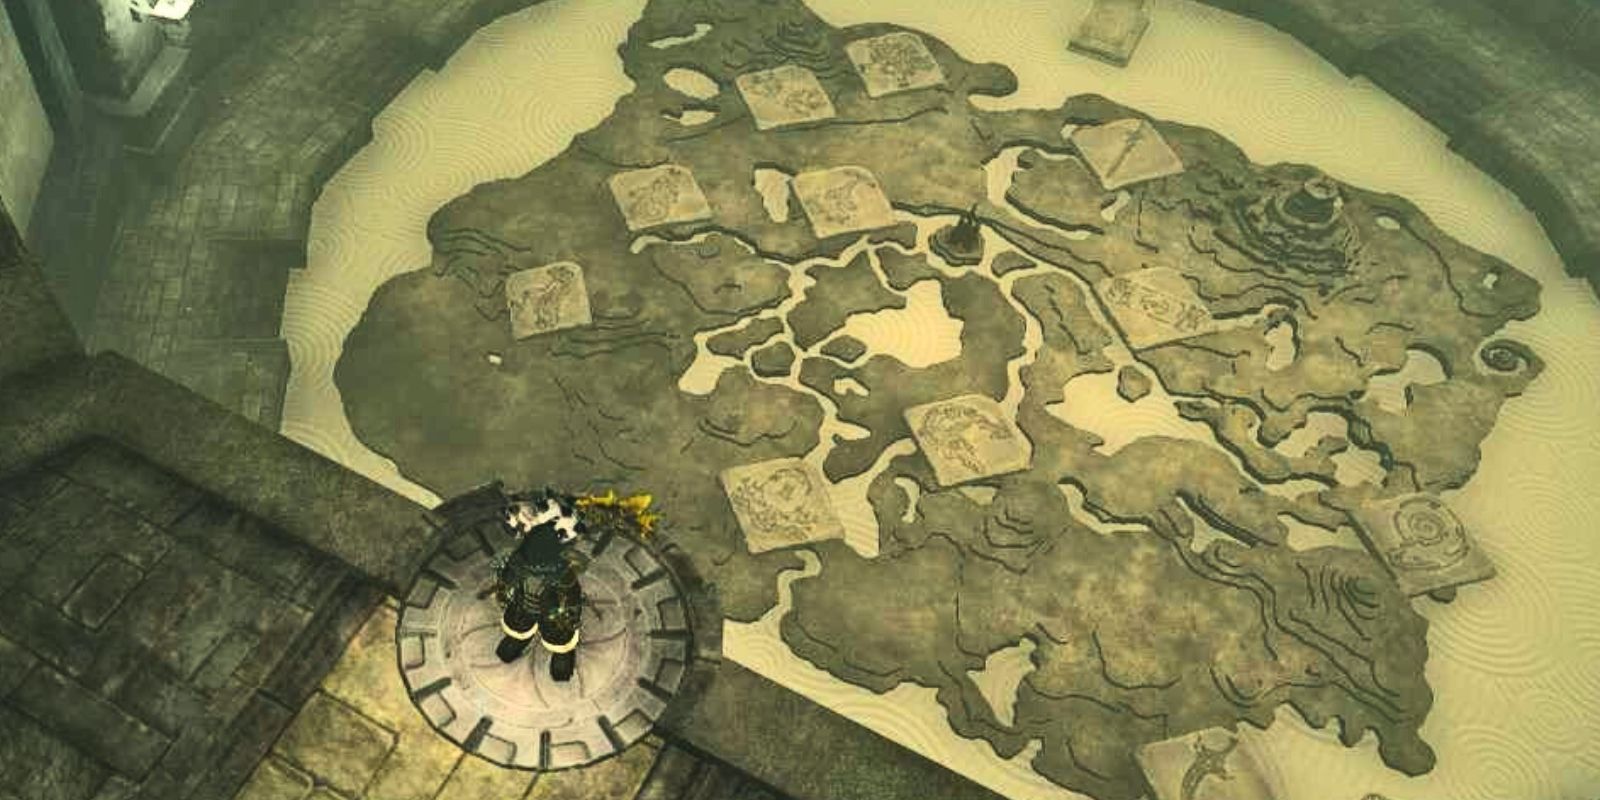 Link standing over the map in the forgotten temple in Zelda: Tears of The Kingdom